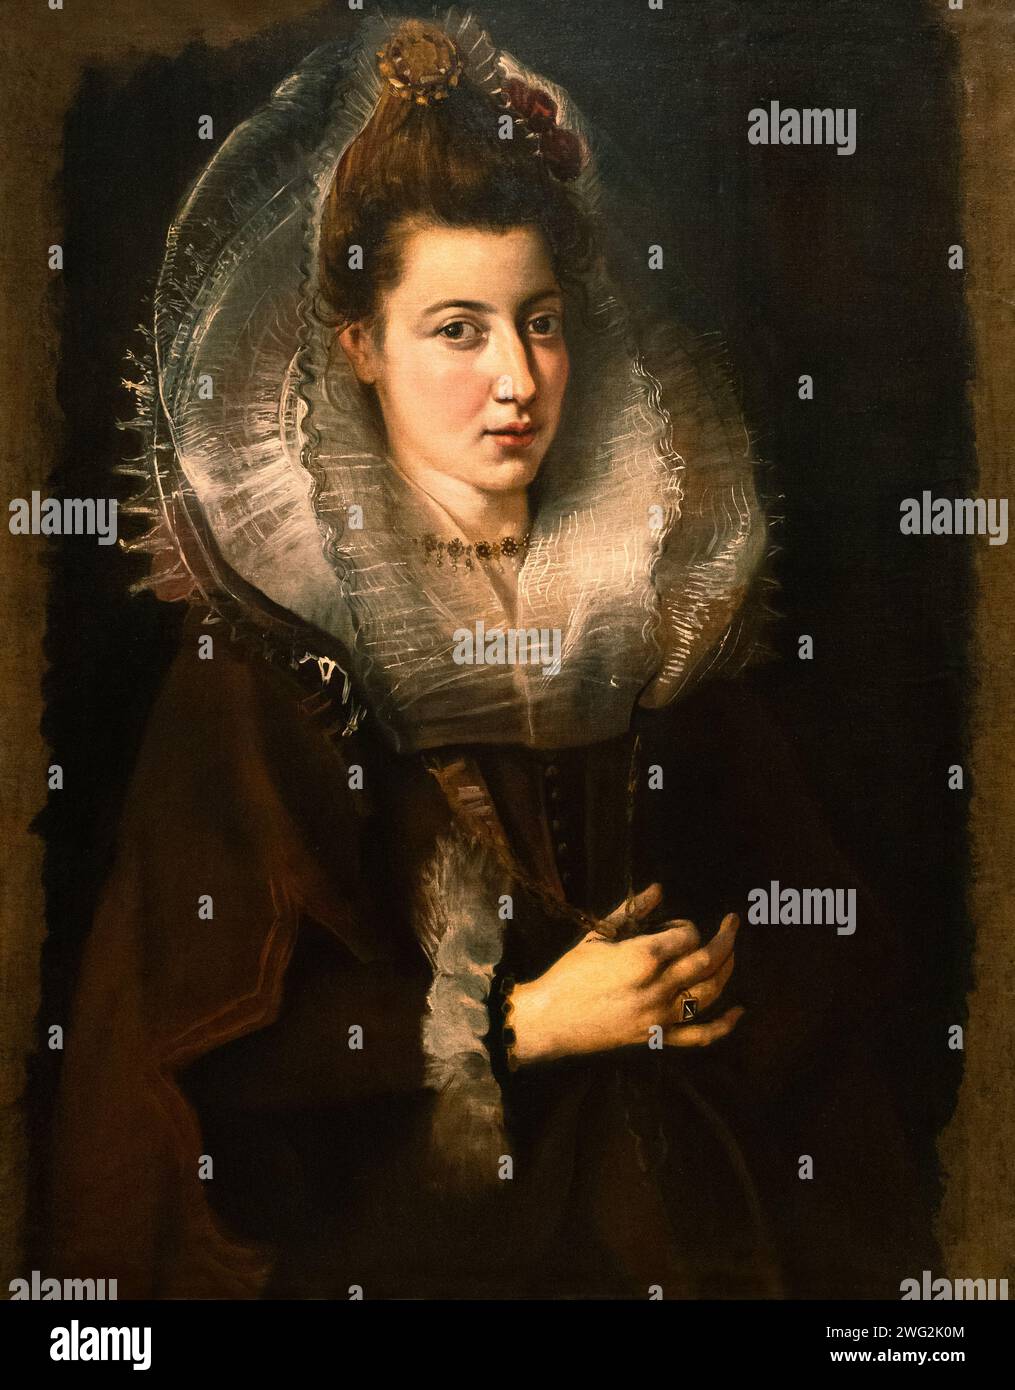 Peter Paul Rubens painting; "Portrait of a Young Woman holding a Chain", c 1603-6. 17th century female portrait, The Klesch Collection of Art. Stock Photo